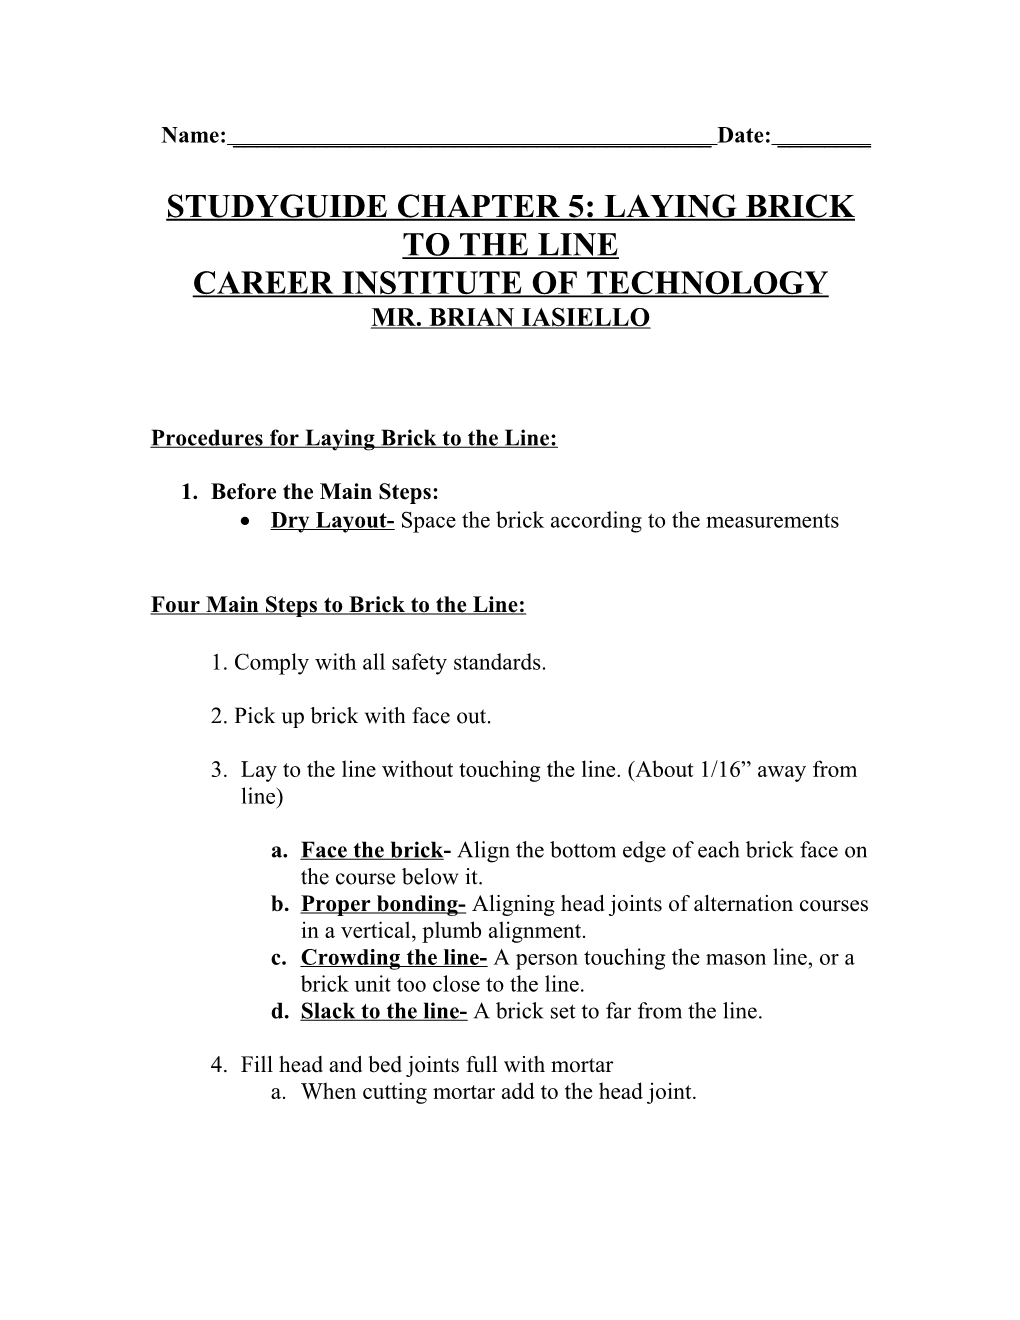 Studyguide Chapter 5, Laying Brick to the Line